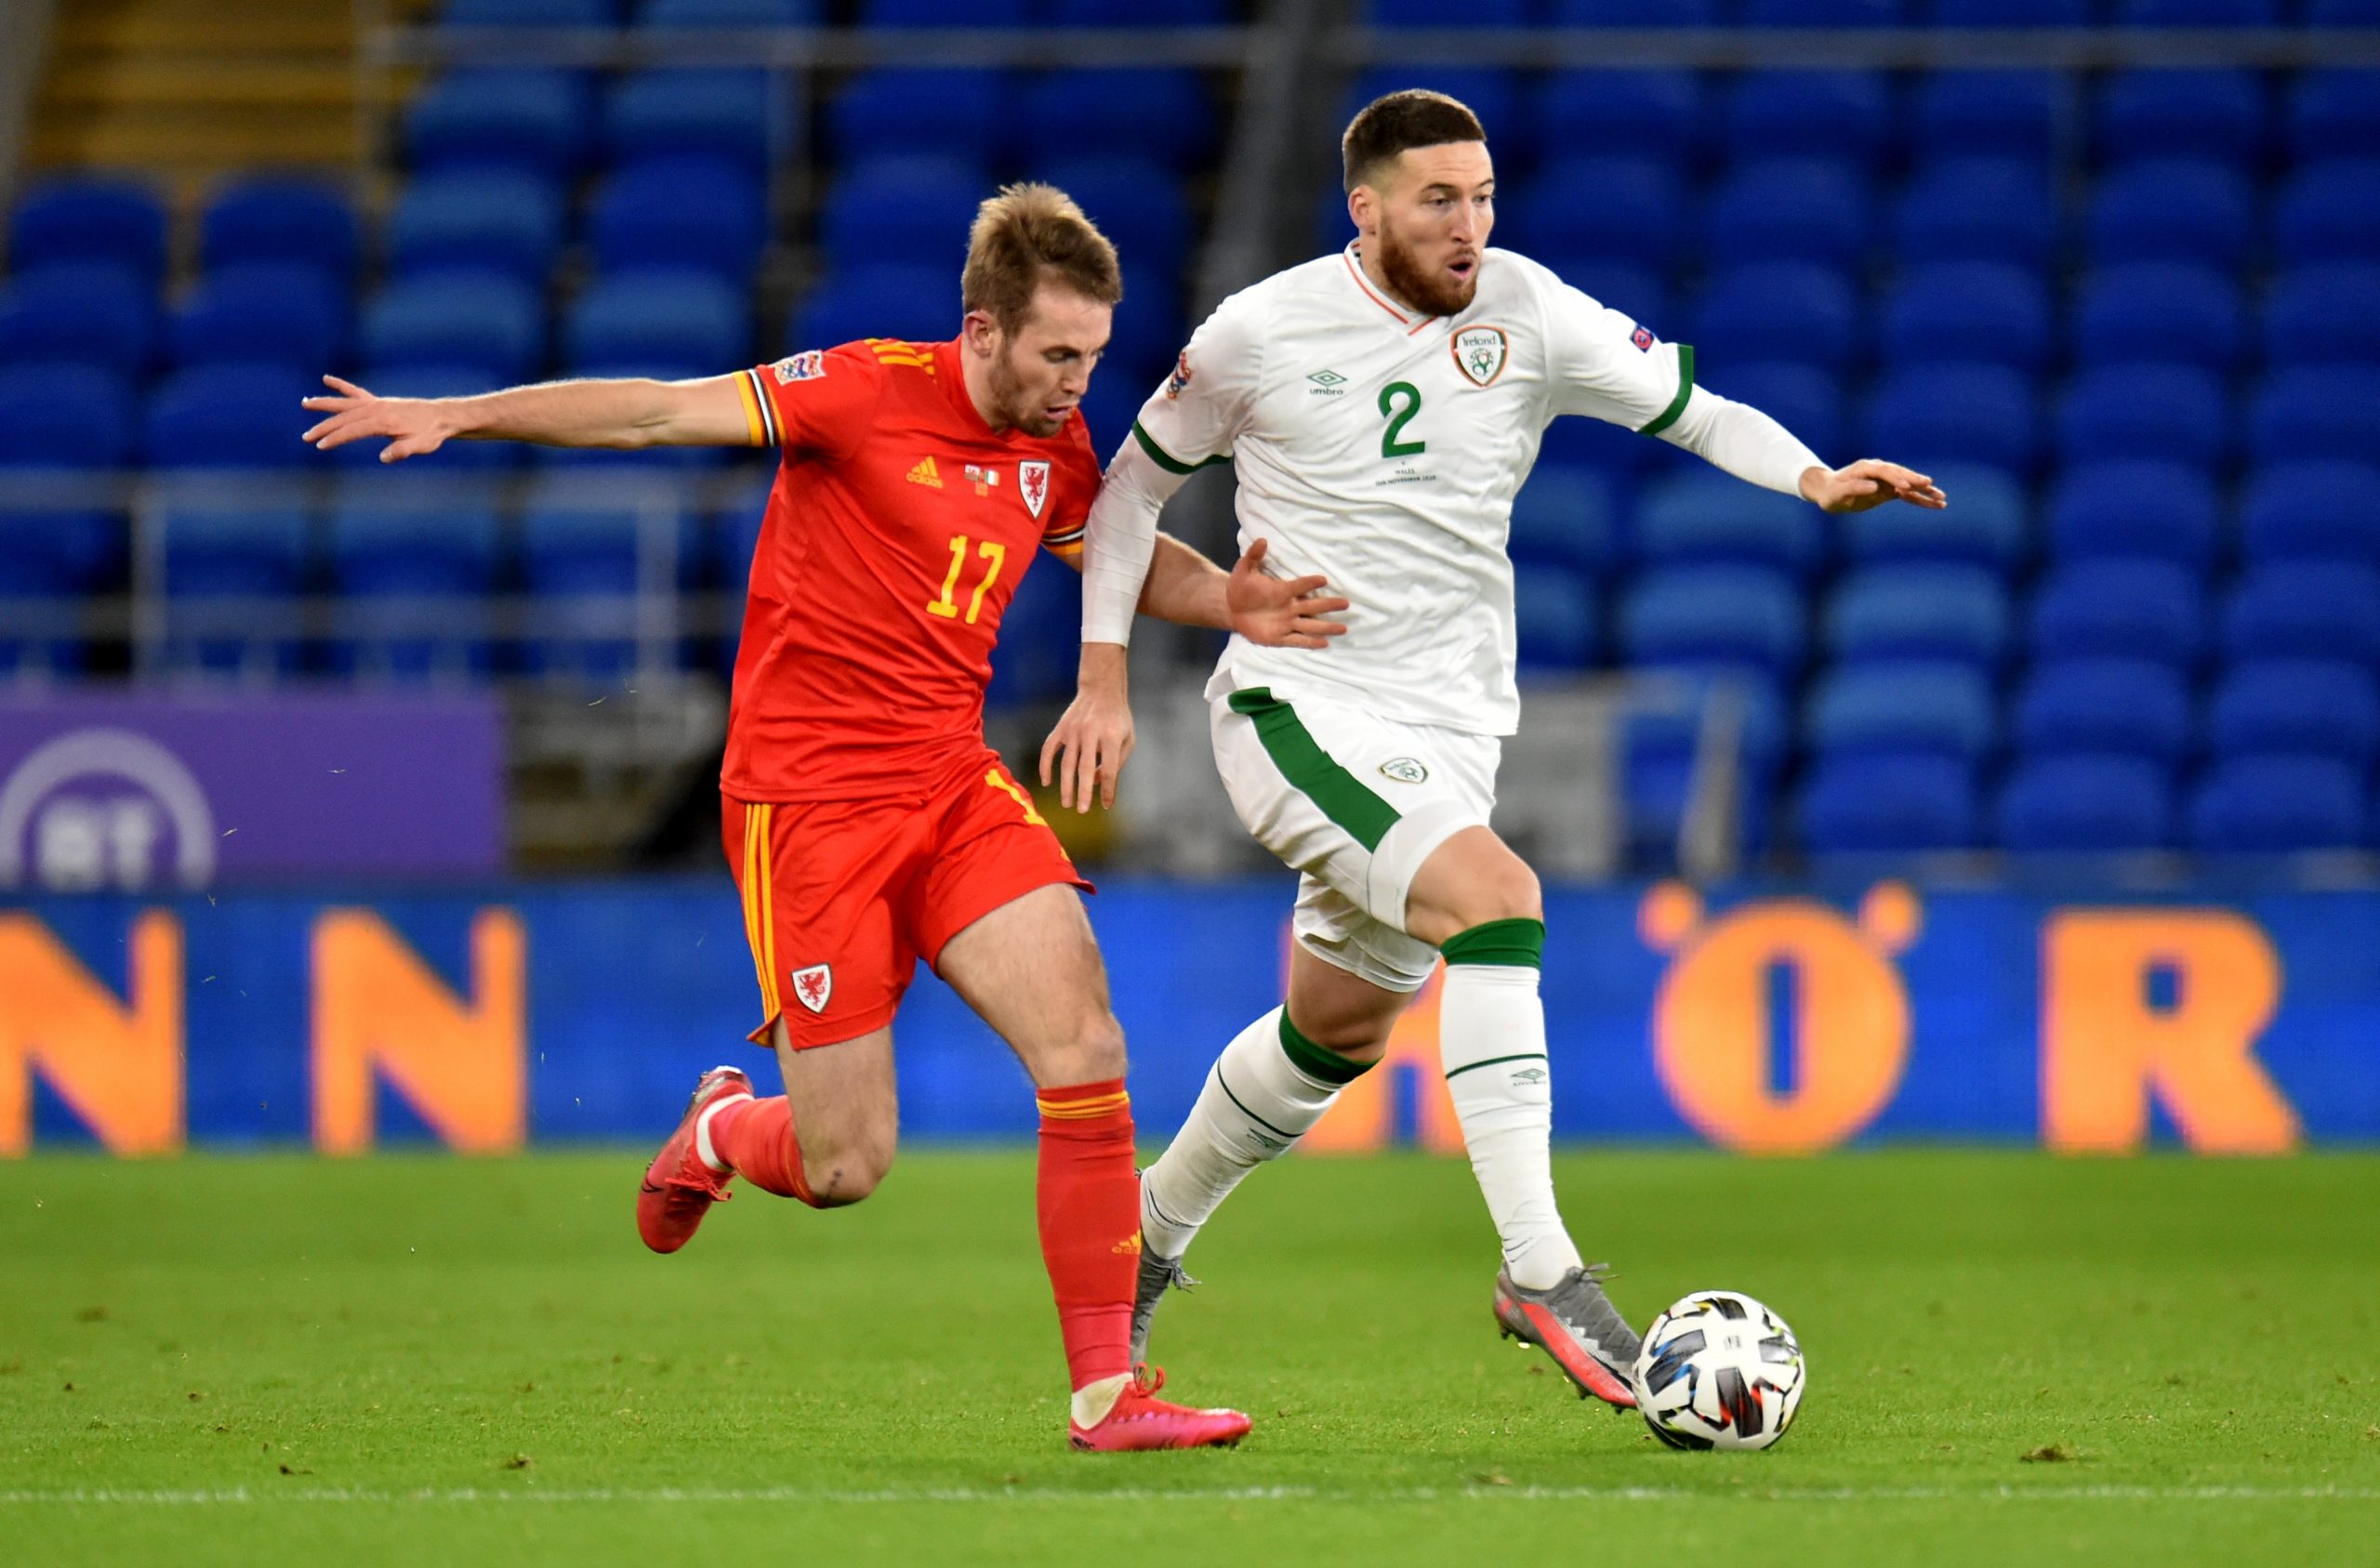 epa08822483 Rhys Norrington-Davies of Wales (L) in action against Matt Doherty of Ireland (R) during the UEFA Nations League soccer match between Wales and Ireland at the Cardiff City stadium in Cardiff, Britain, 15 November 2020.  EPA/PETER POWELL